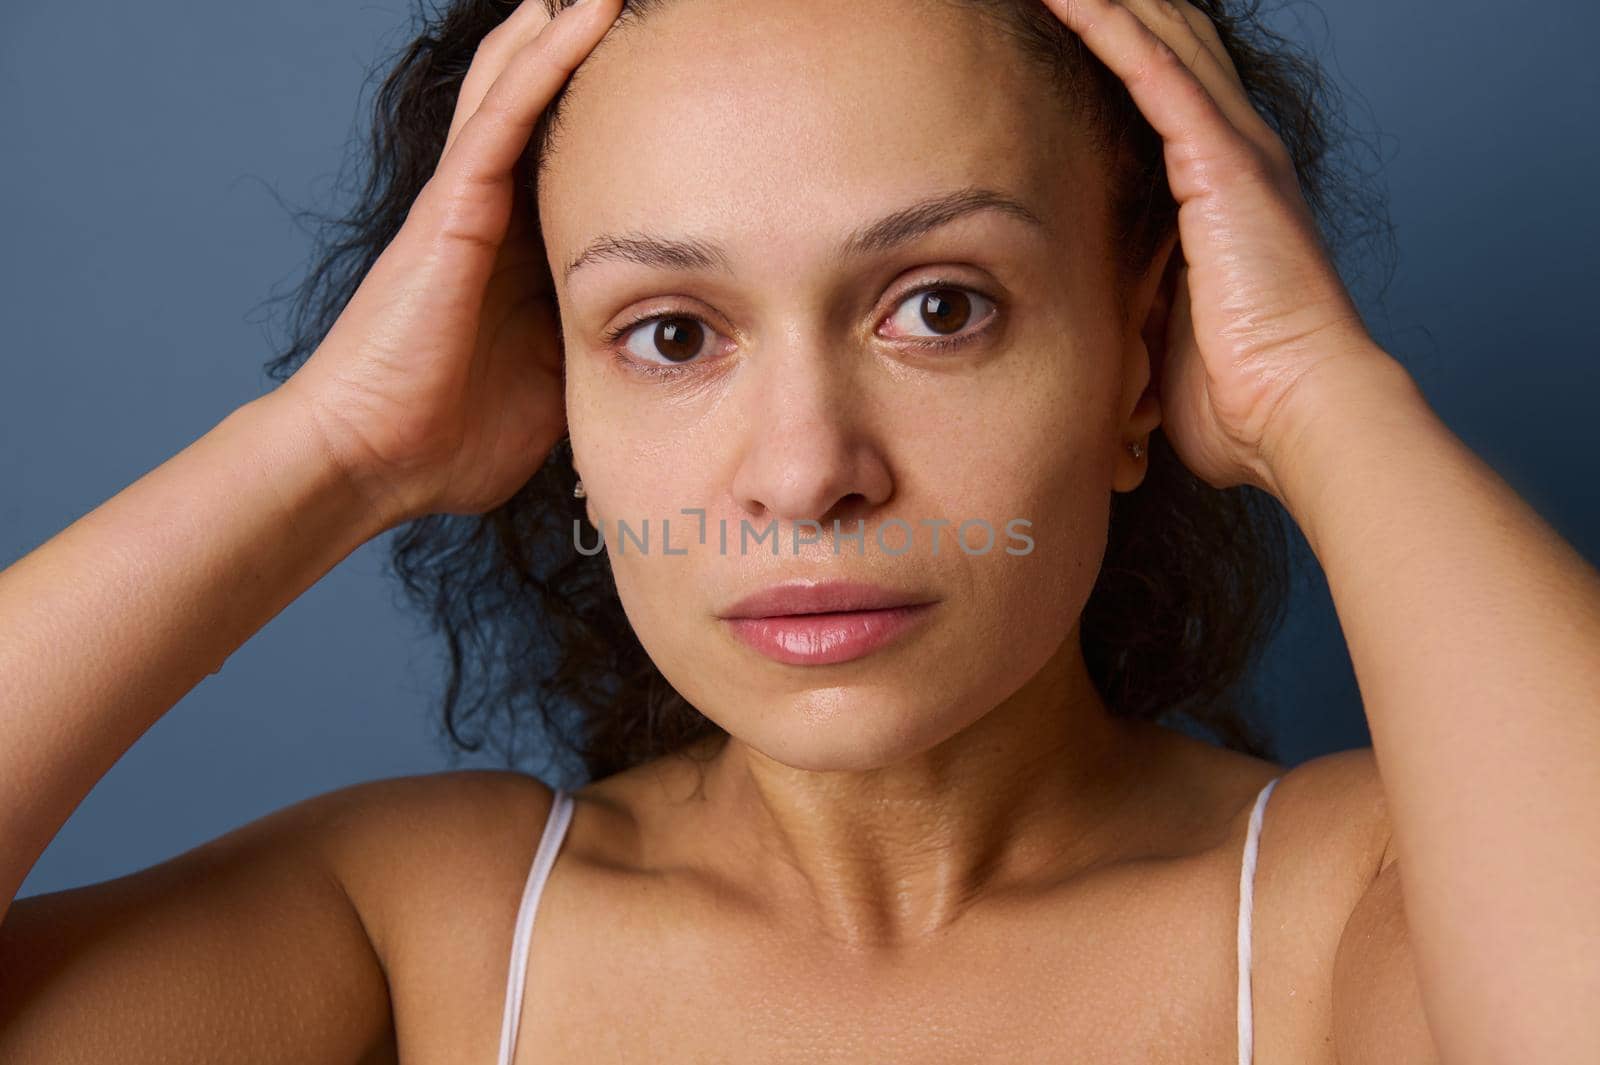 Close-up portrait of middle aged woman with no make-up and wet skin looking at camera while washing her face, taking care of her beauty and skin. Freshness, purity, cleanse, removing make-up concept by artgf